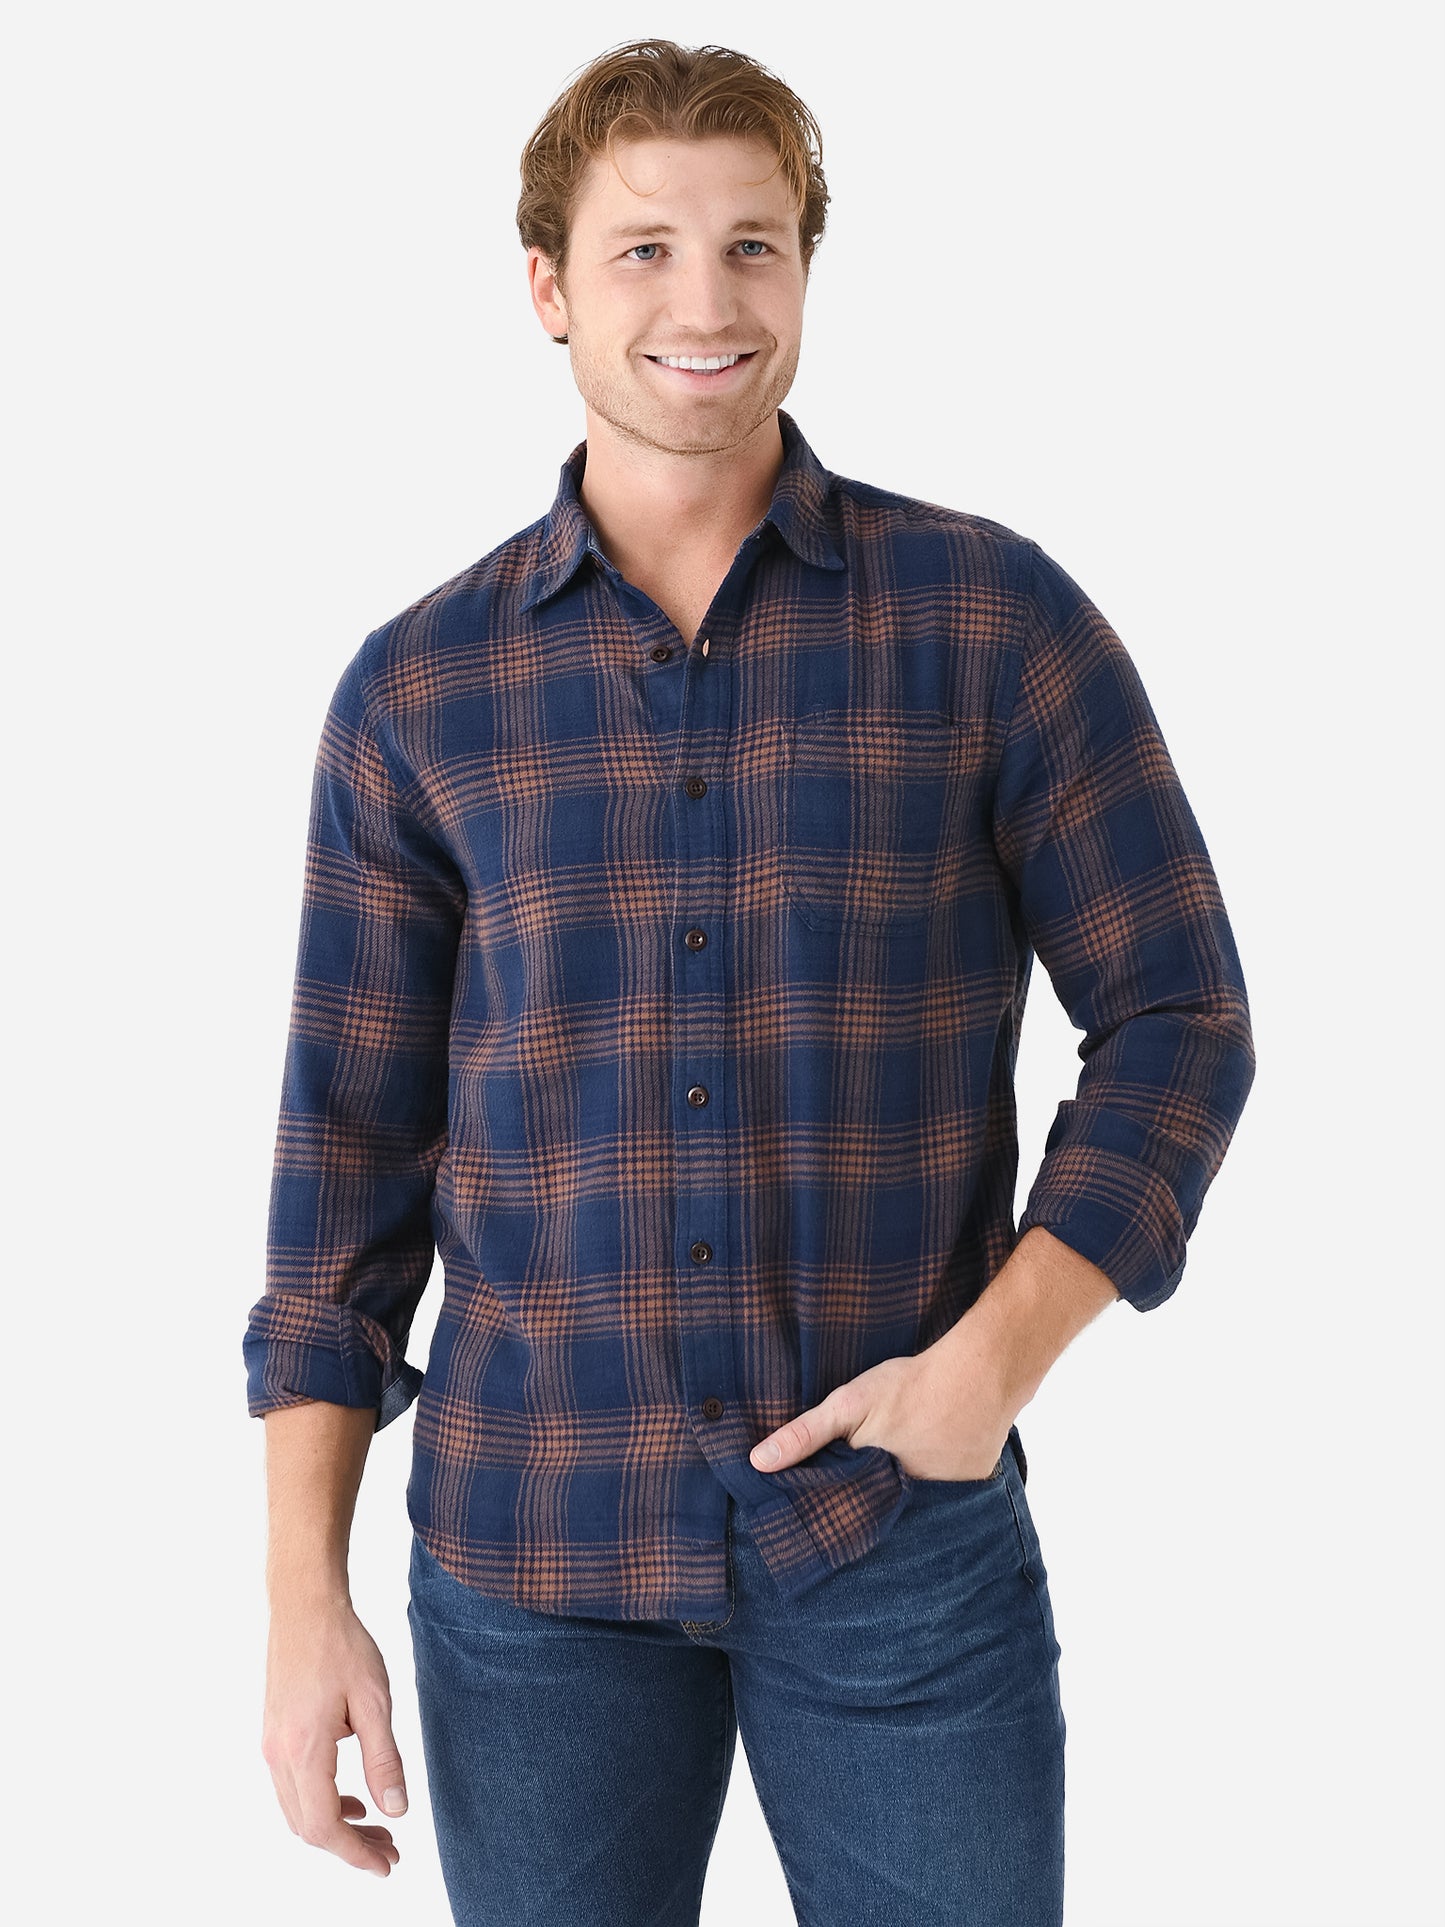 Outerknown Men's Transitional Flannel Shirt